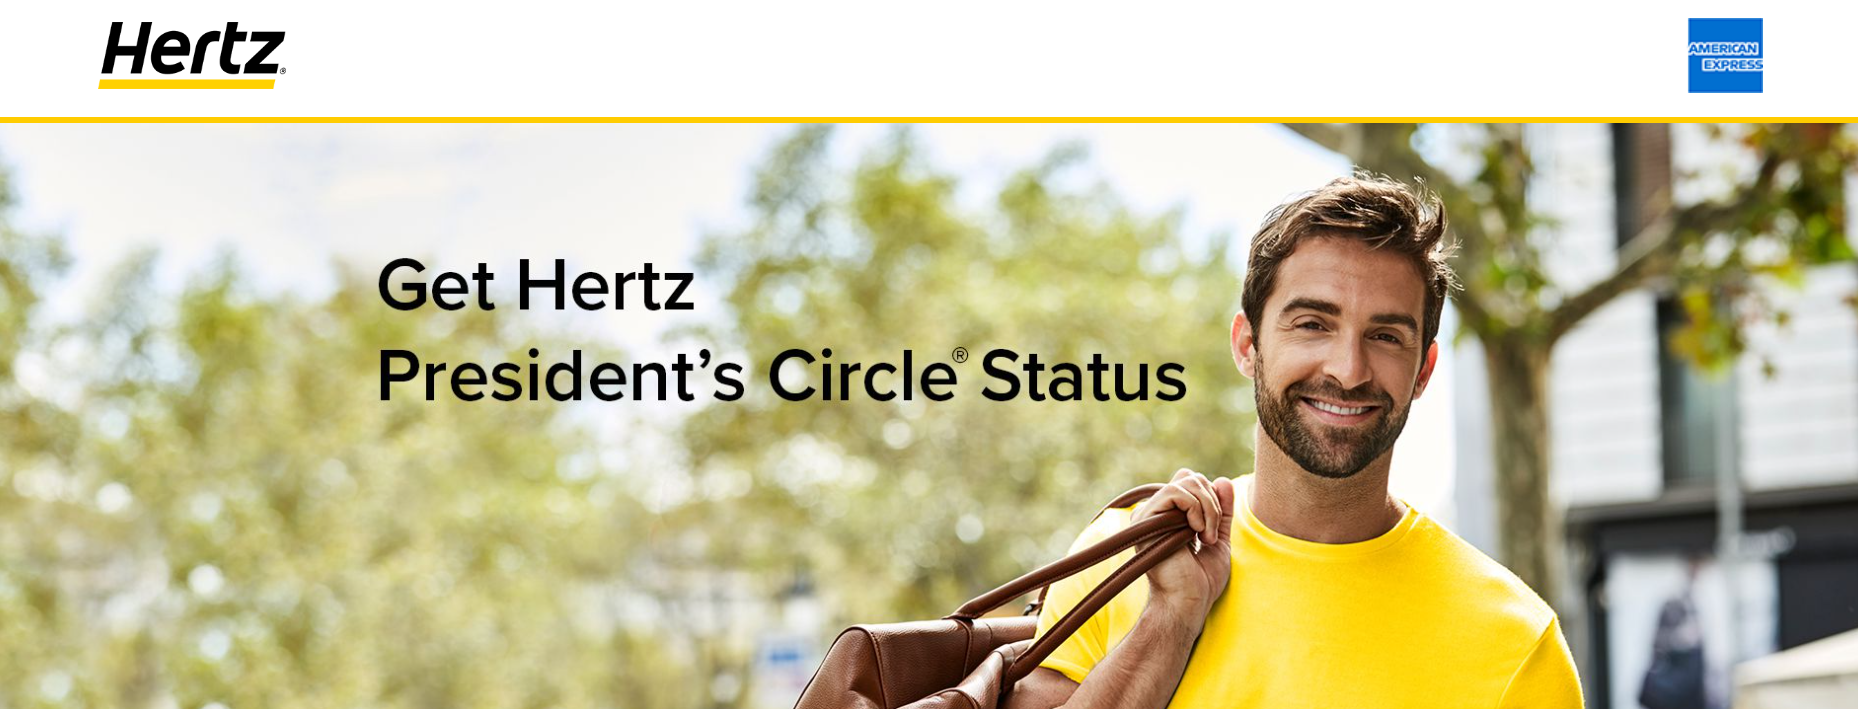 You are currently viewing Amex Platinum cardholders can now register for Hertz President’s Circle status